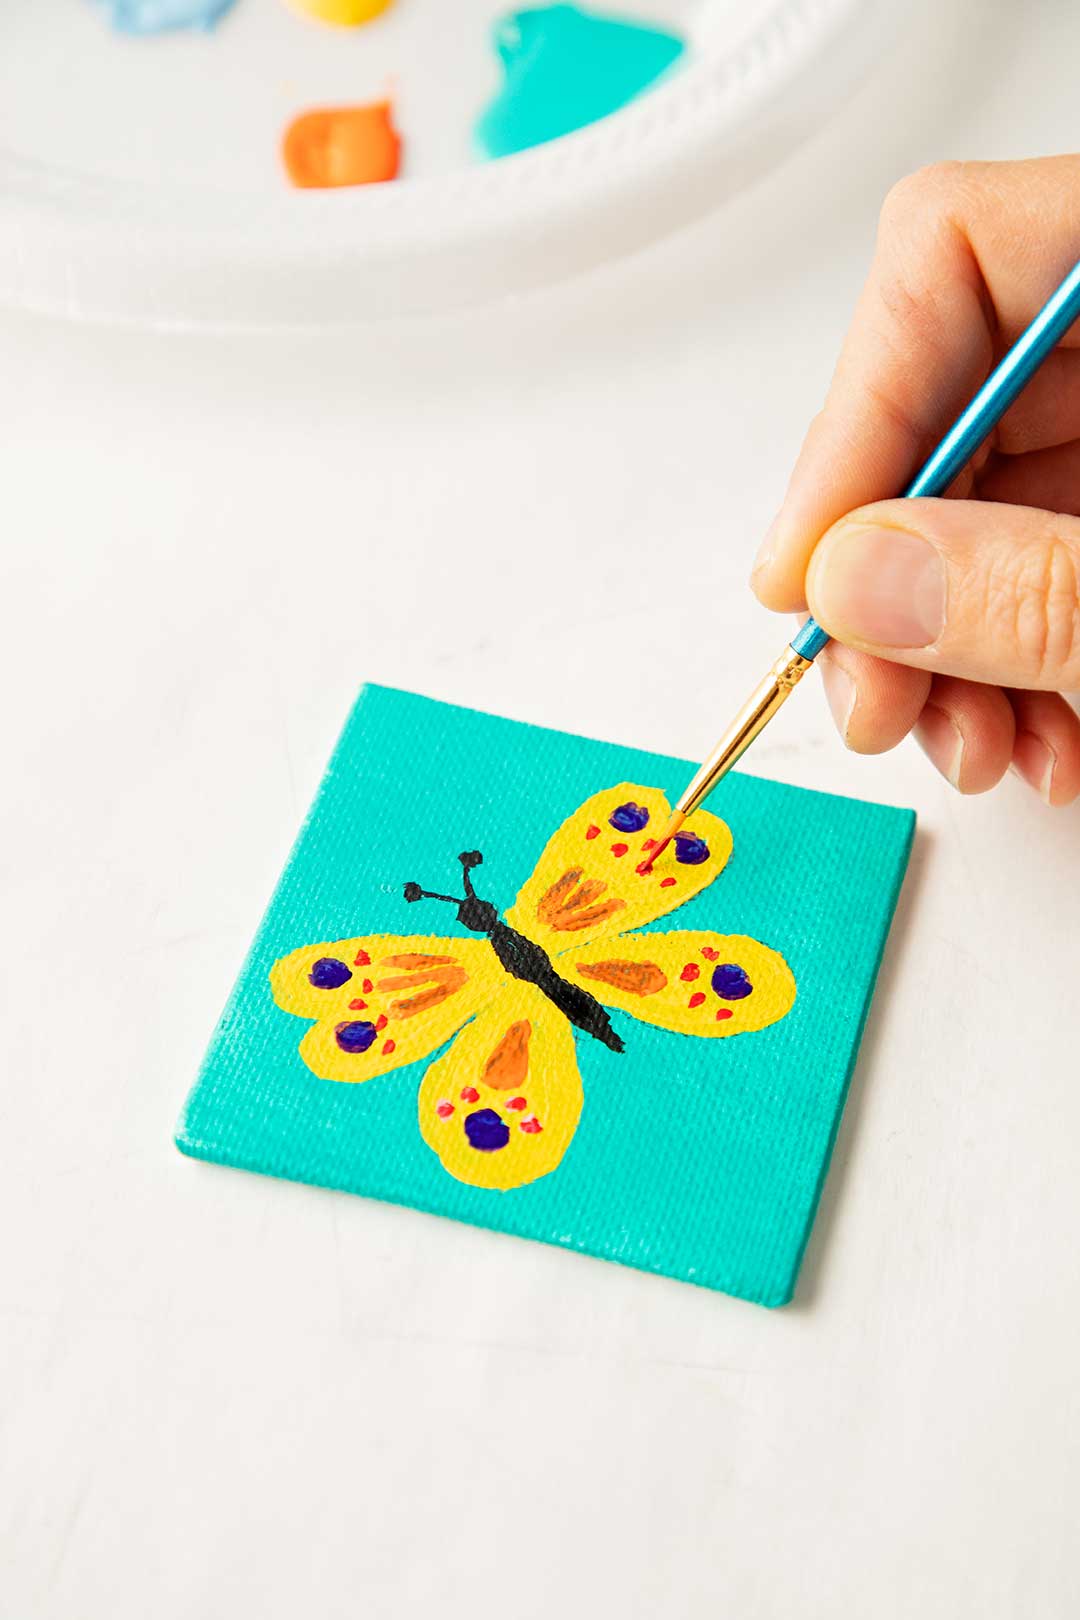 Painting Tiny Canvases 